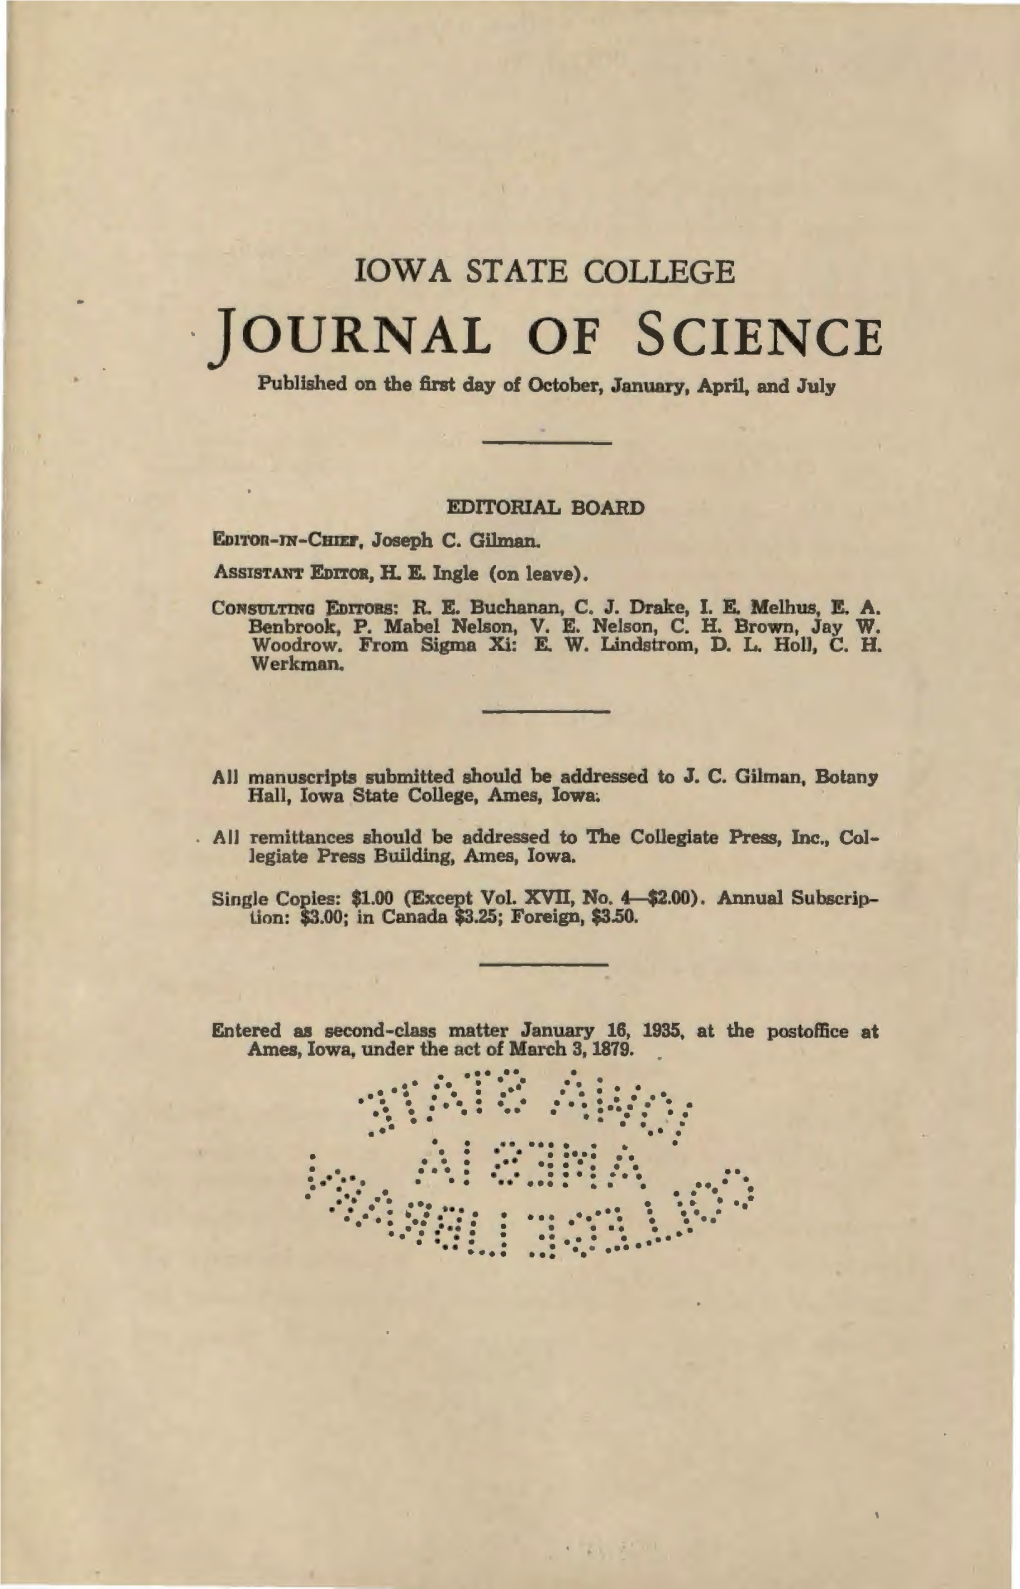 Iowa State College Journal of Science 19.1